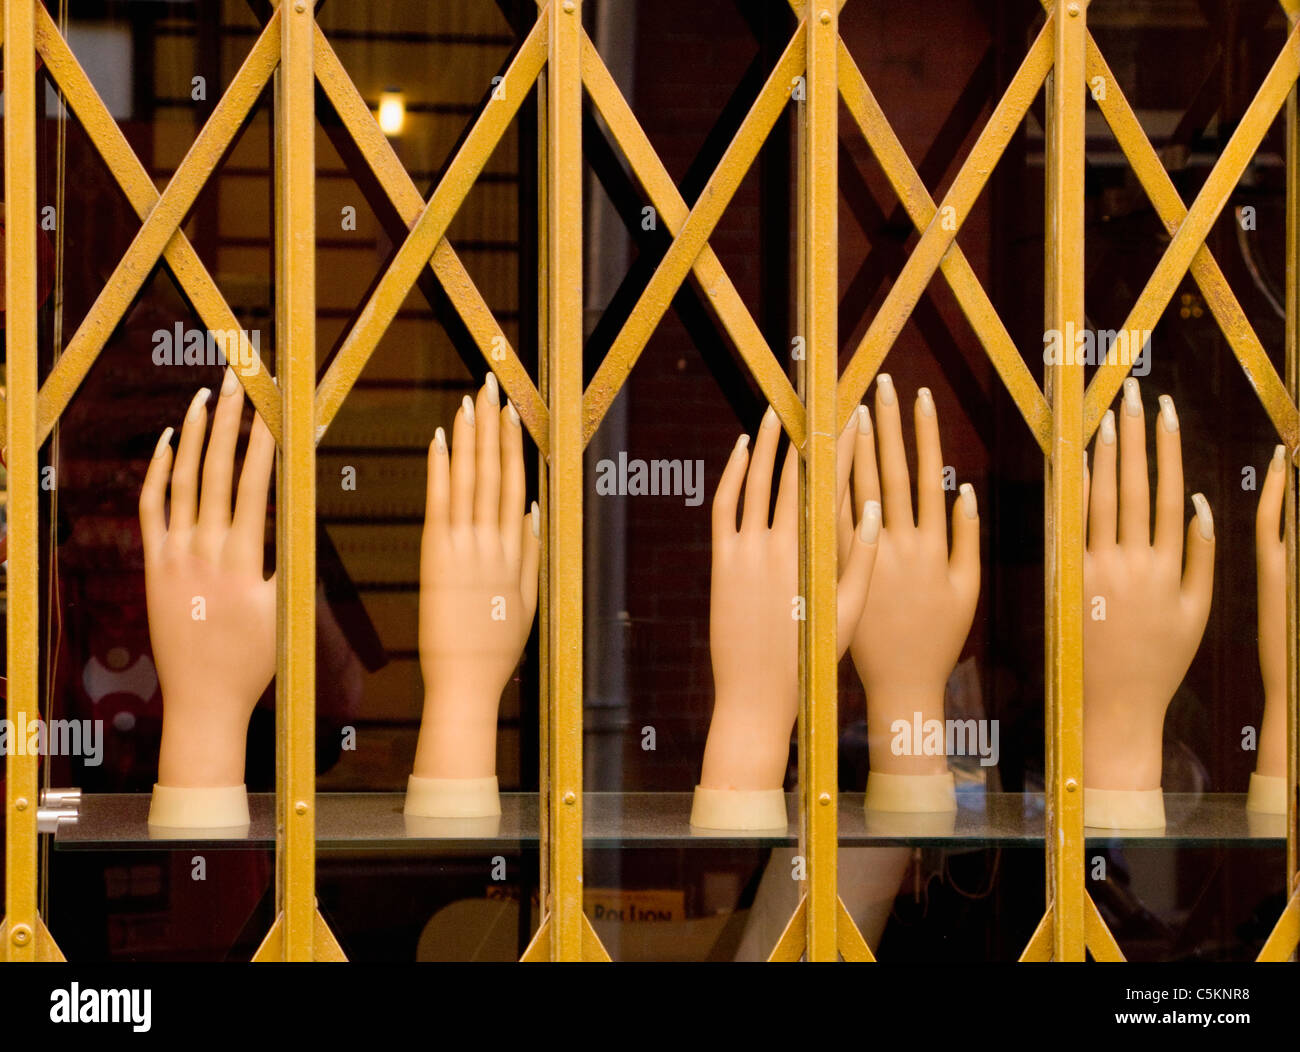 Display of plastic hands in window of a manicurist shop, seen through window grille, Nice, France Stock Photo